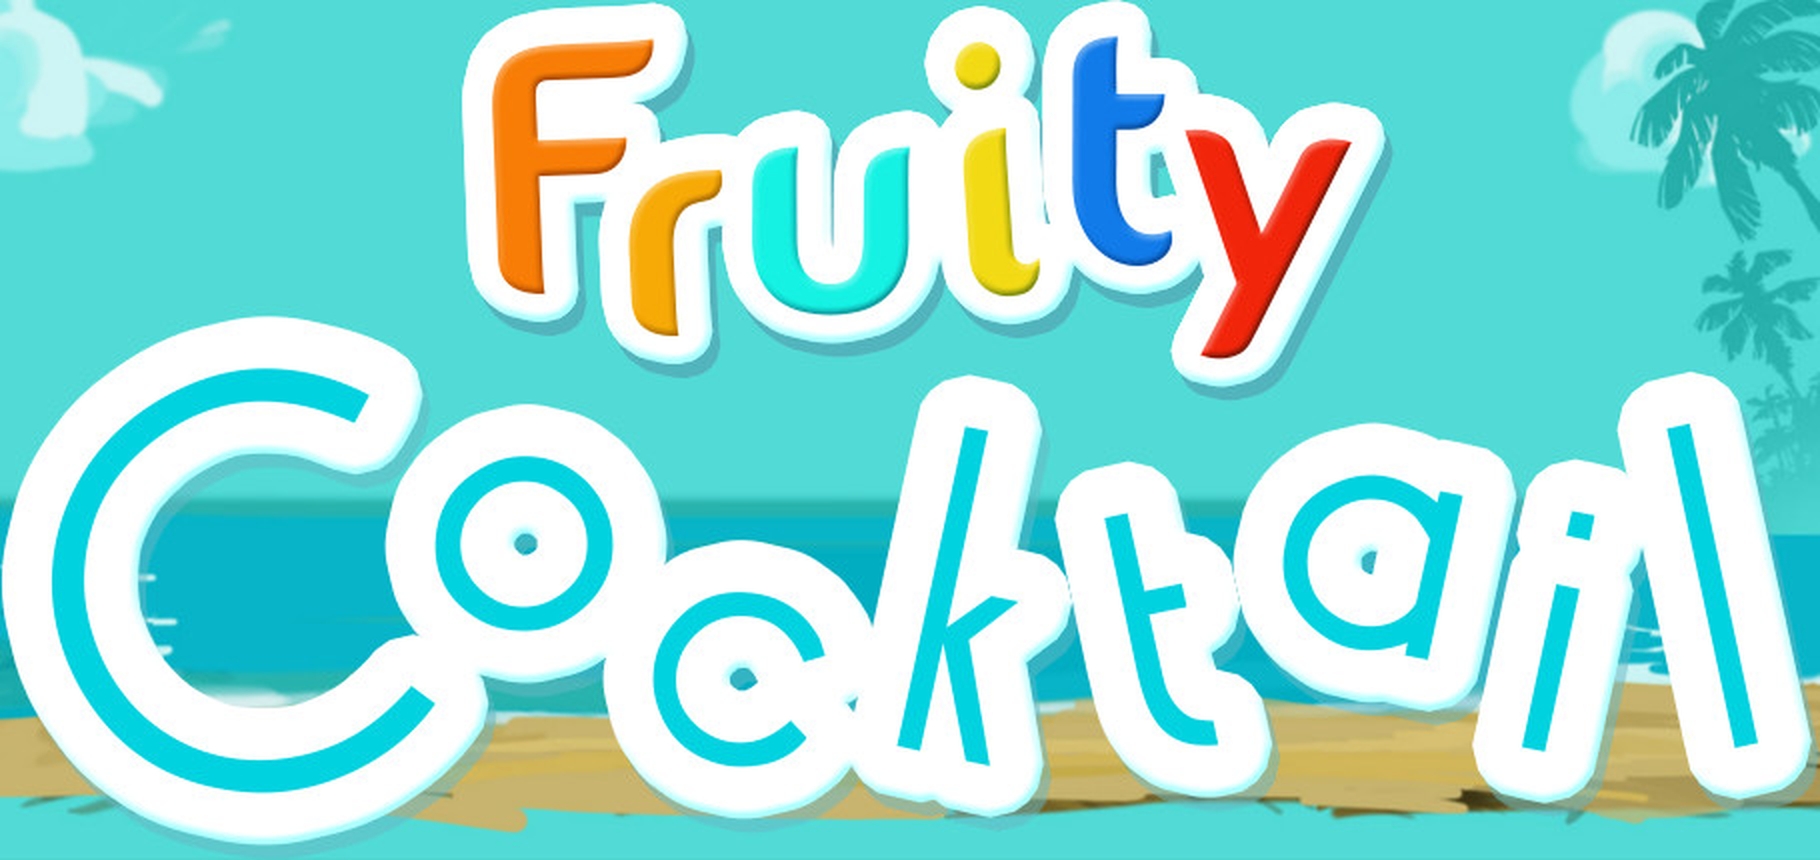 The Fruity Cocktail Online Slot Demo Game by R. Franco